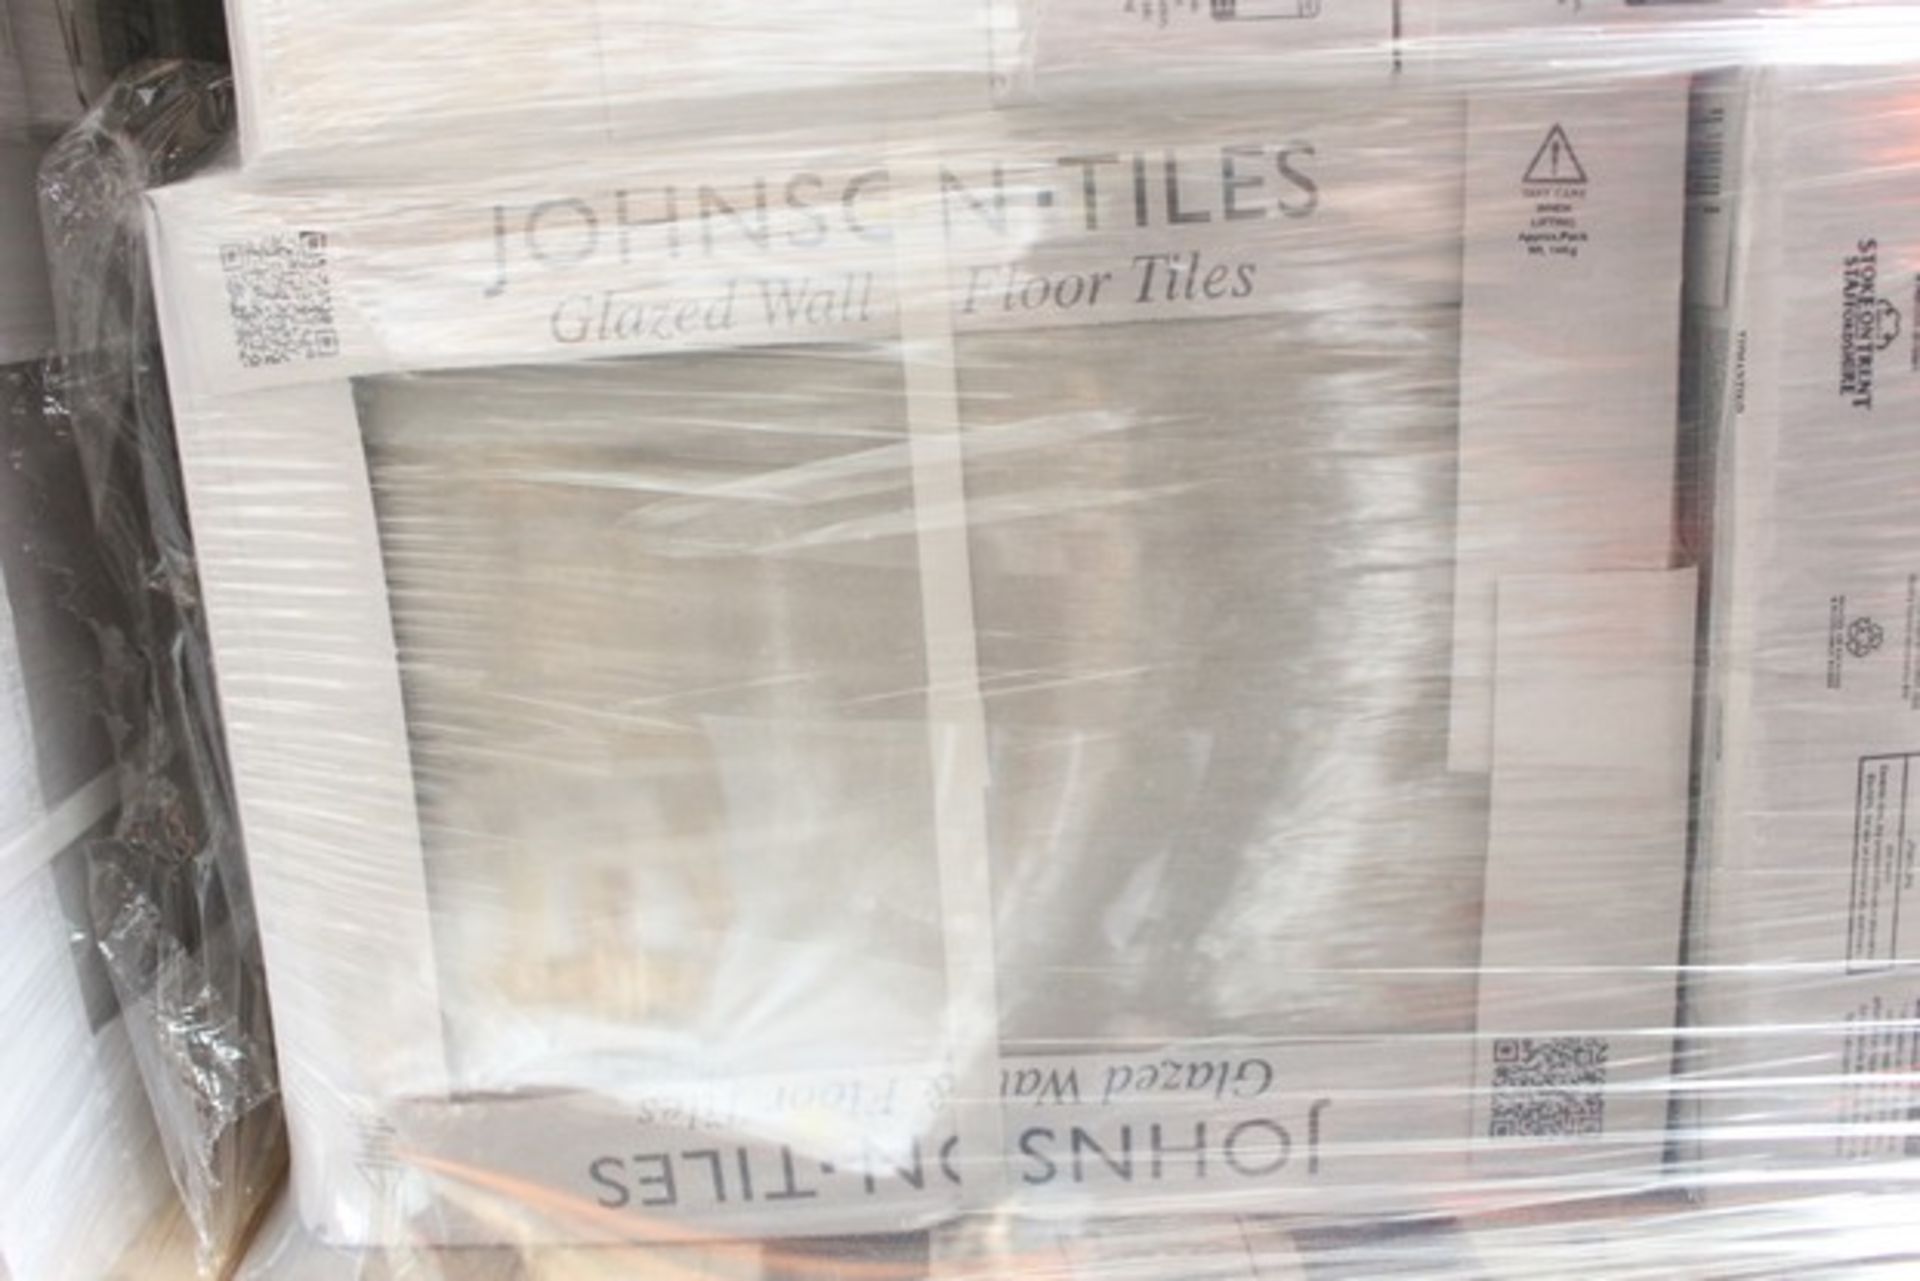 48X FACTORY SEALED BY JOHNSON TILES GLAZED WALL AND FLOOR TILES 360 X 270MM RRP £19.99 COMBINED - Image 2 of 2